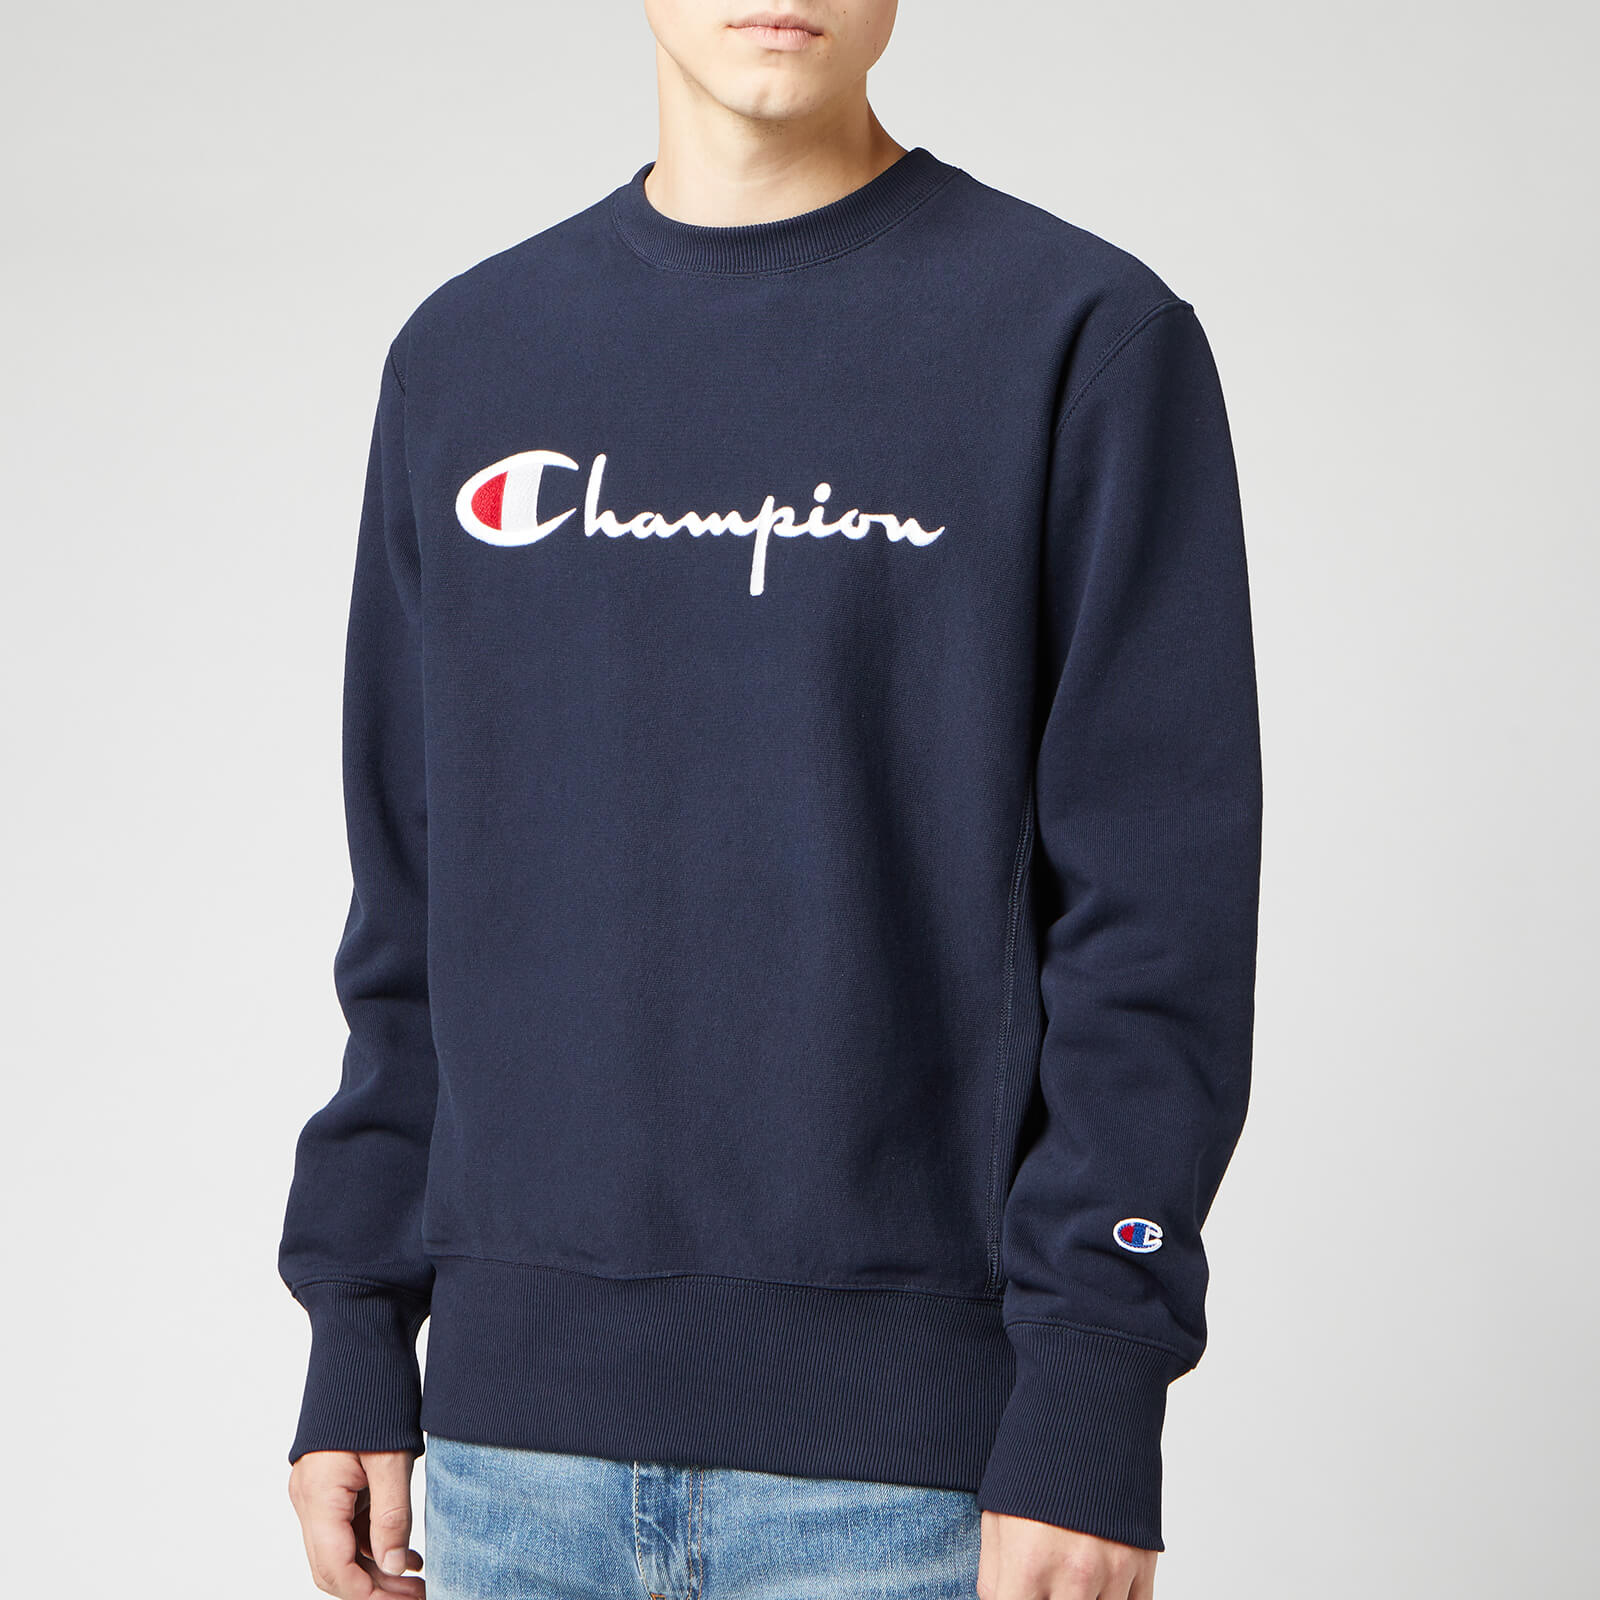 how much is a champion sweatshirt